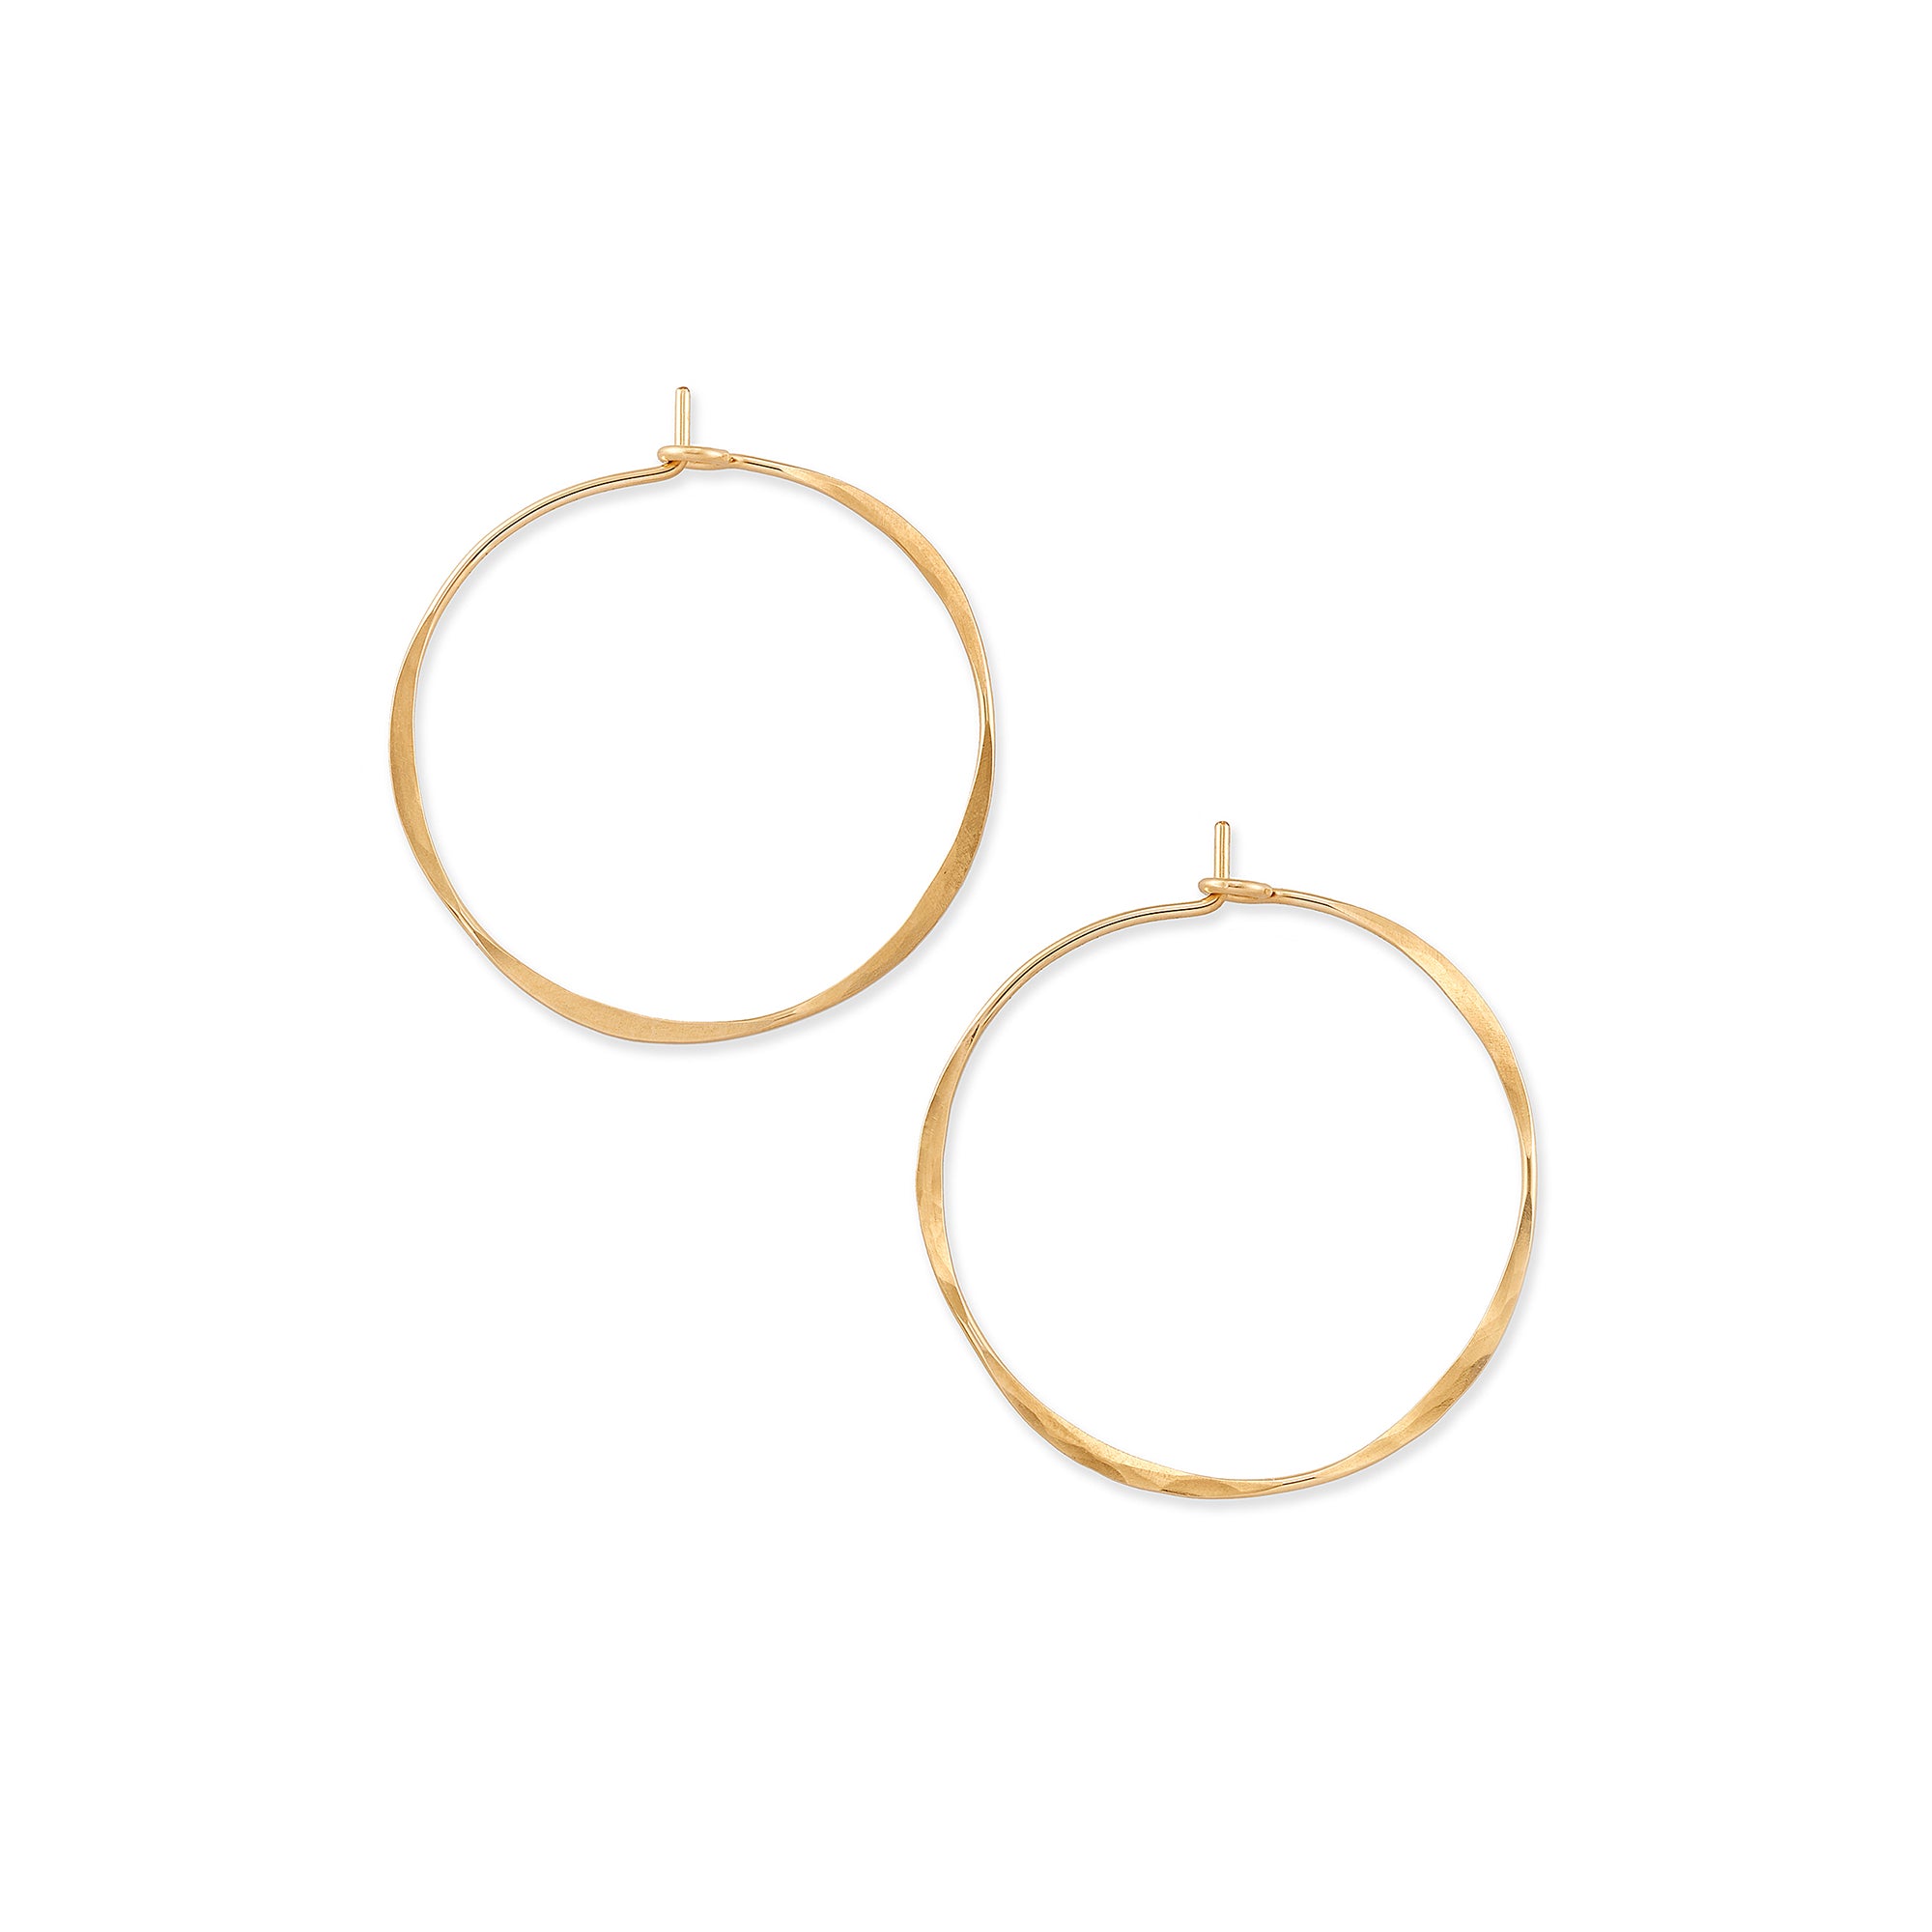 Bold and versatile, our classic hammered hoops are the perfect statement-making pair to add to a modern, casual collection